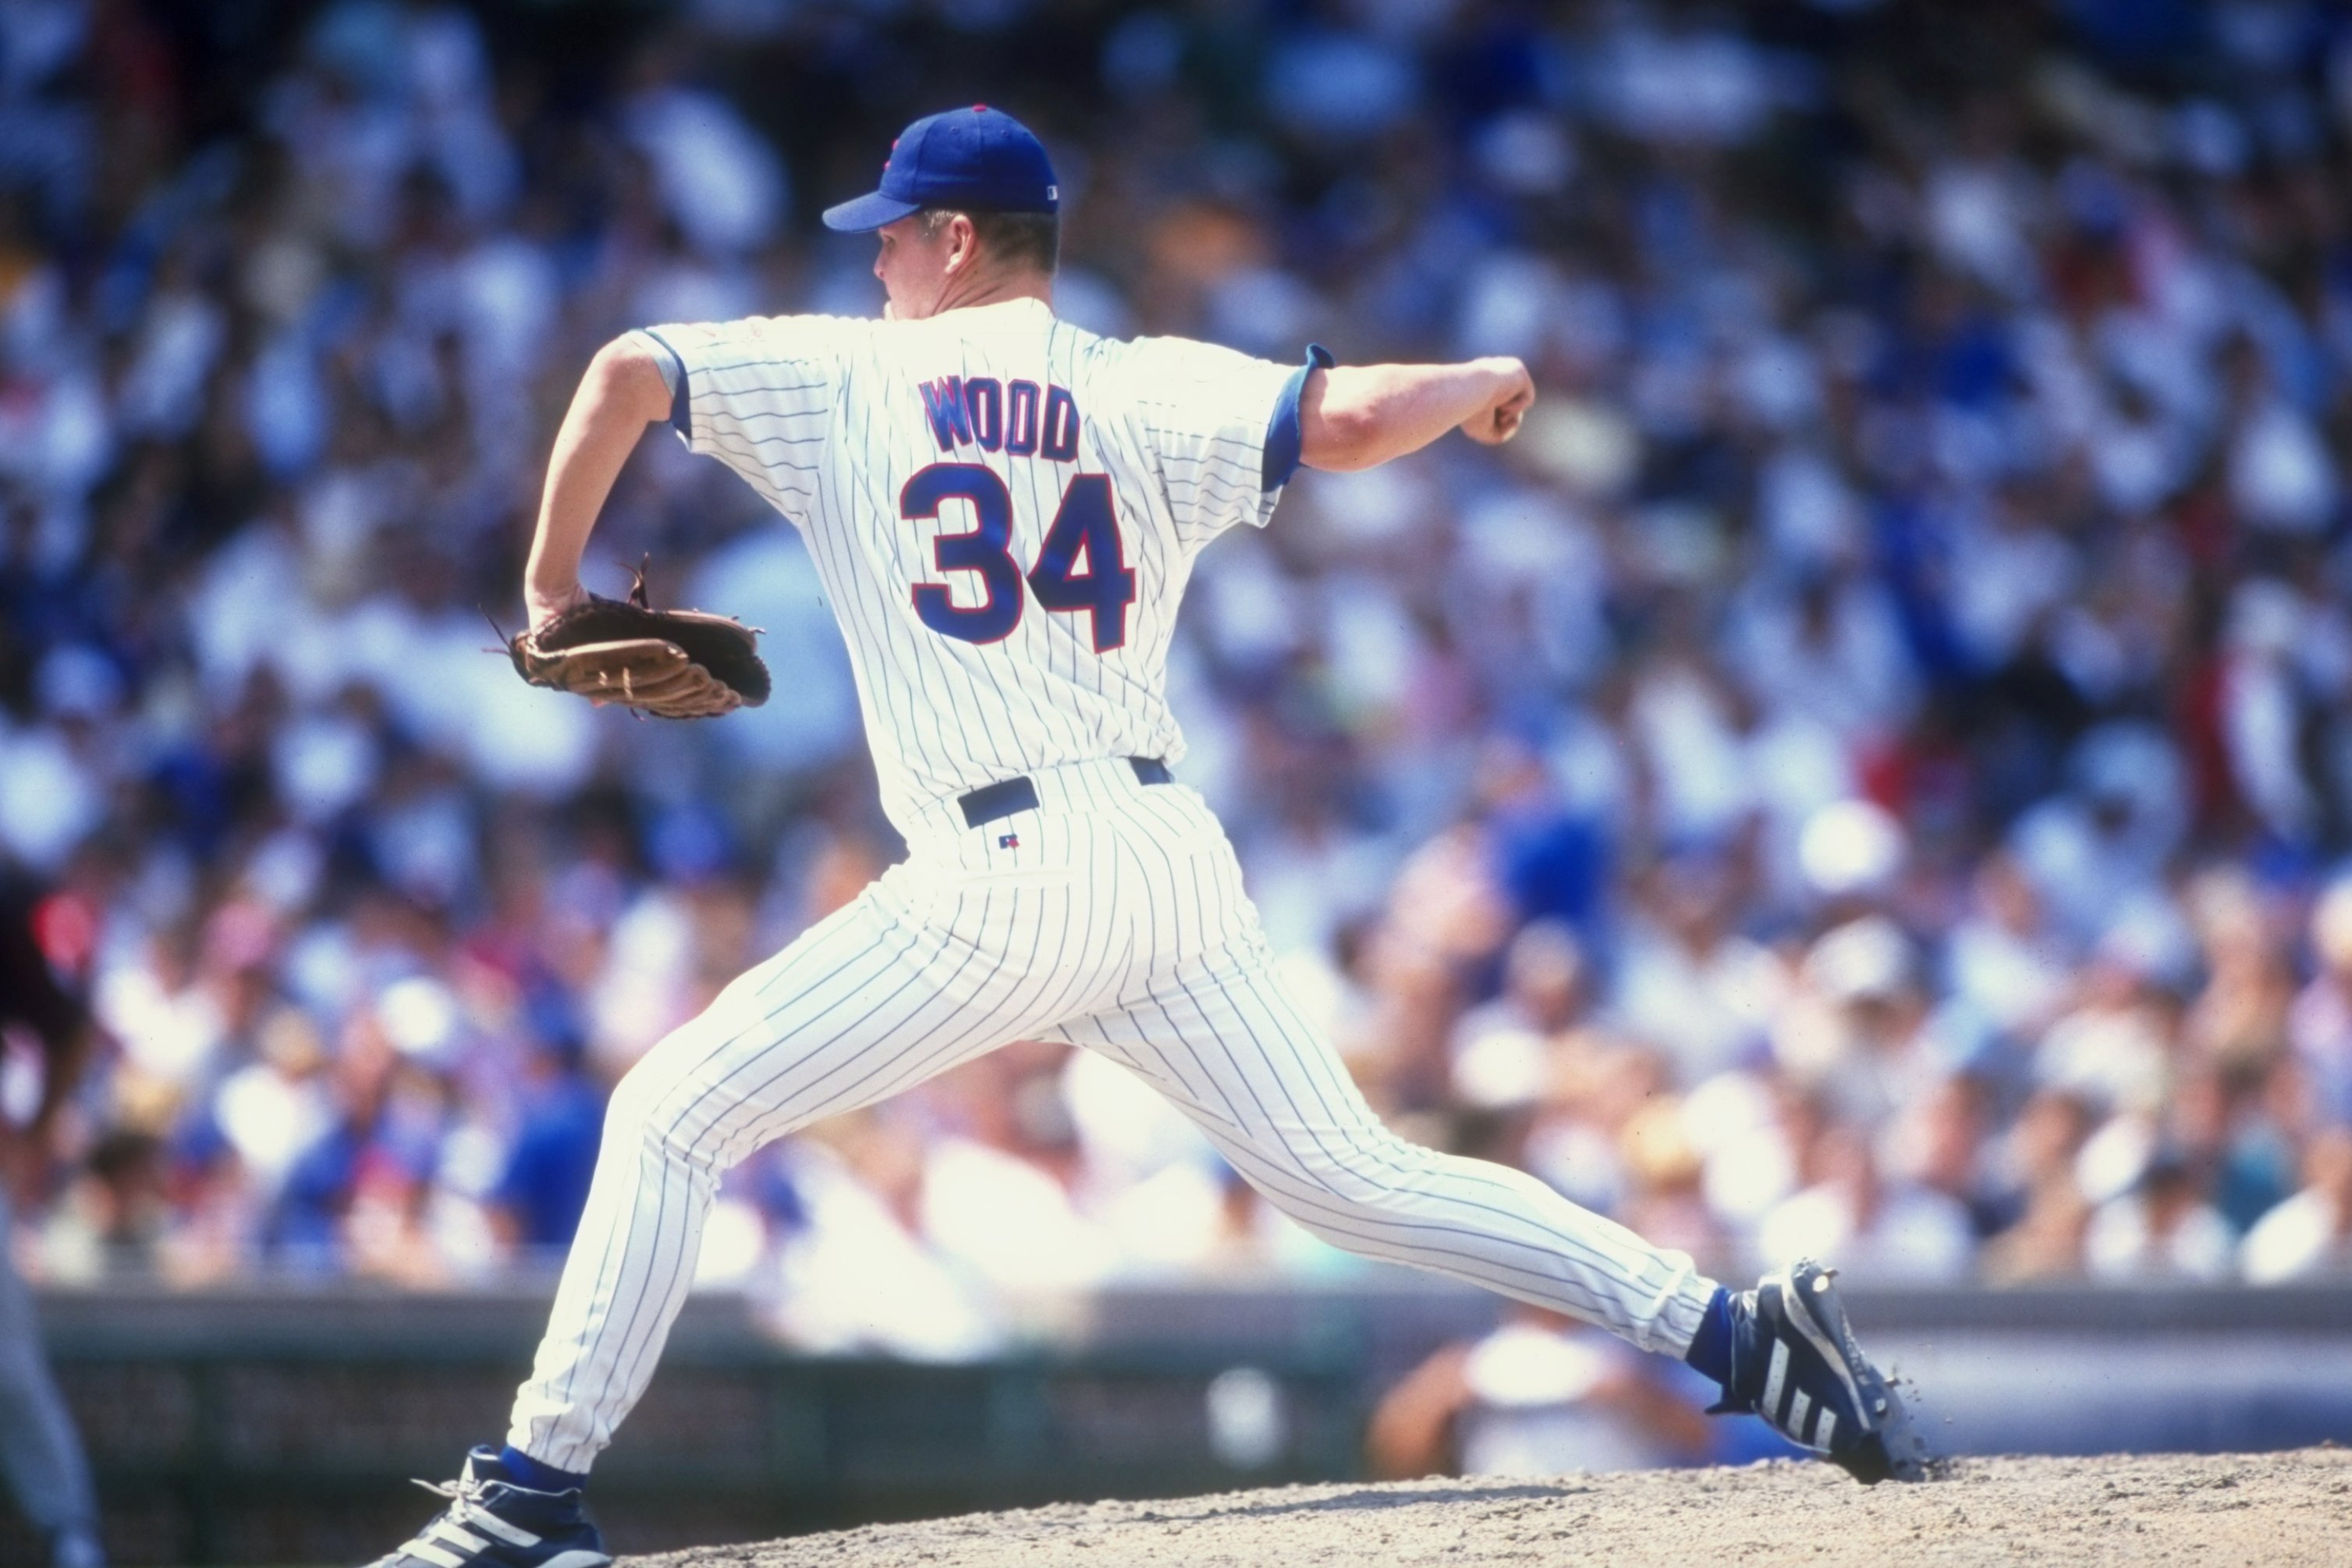 kerry wood 20 strikeout game